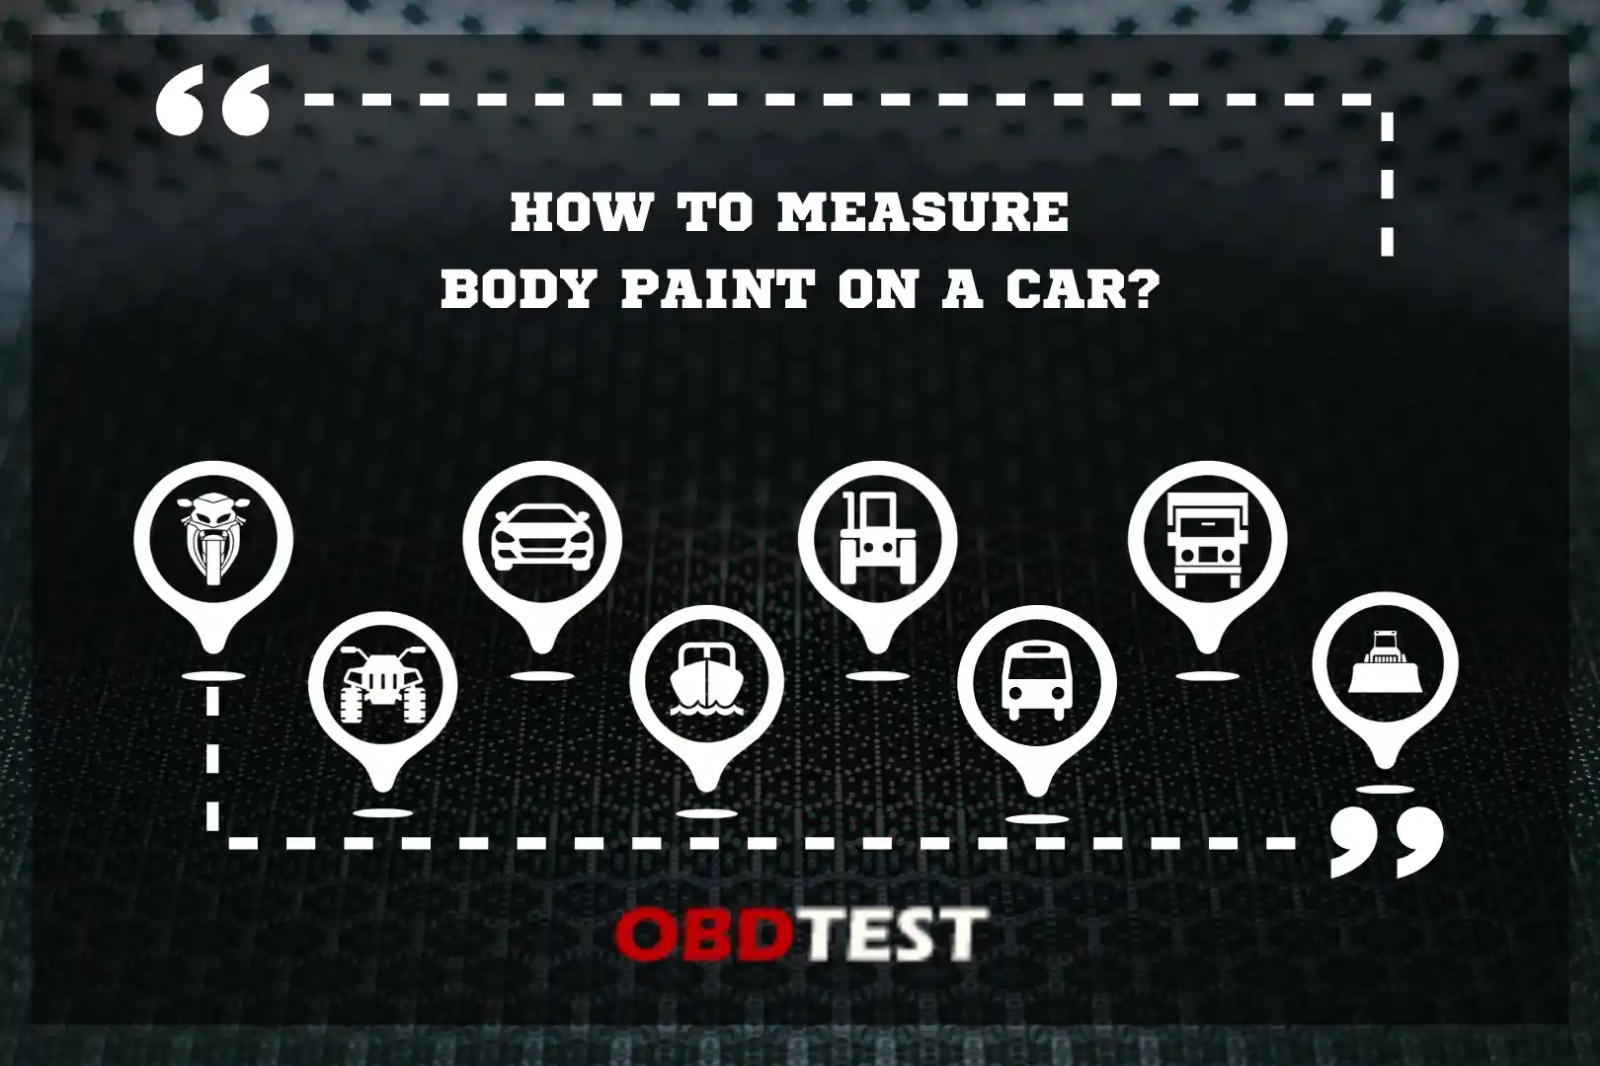 Devices used to measure body paint on a car?